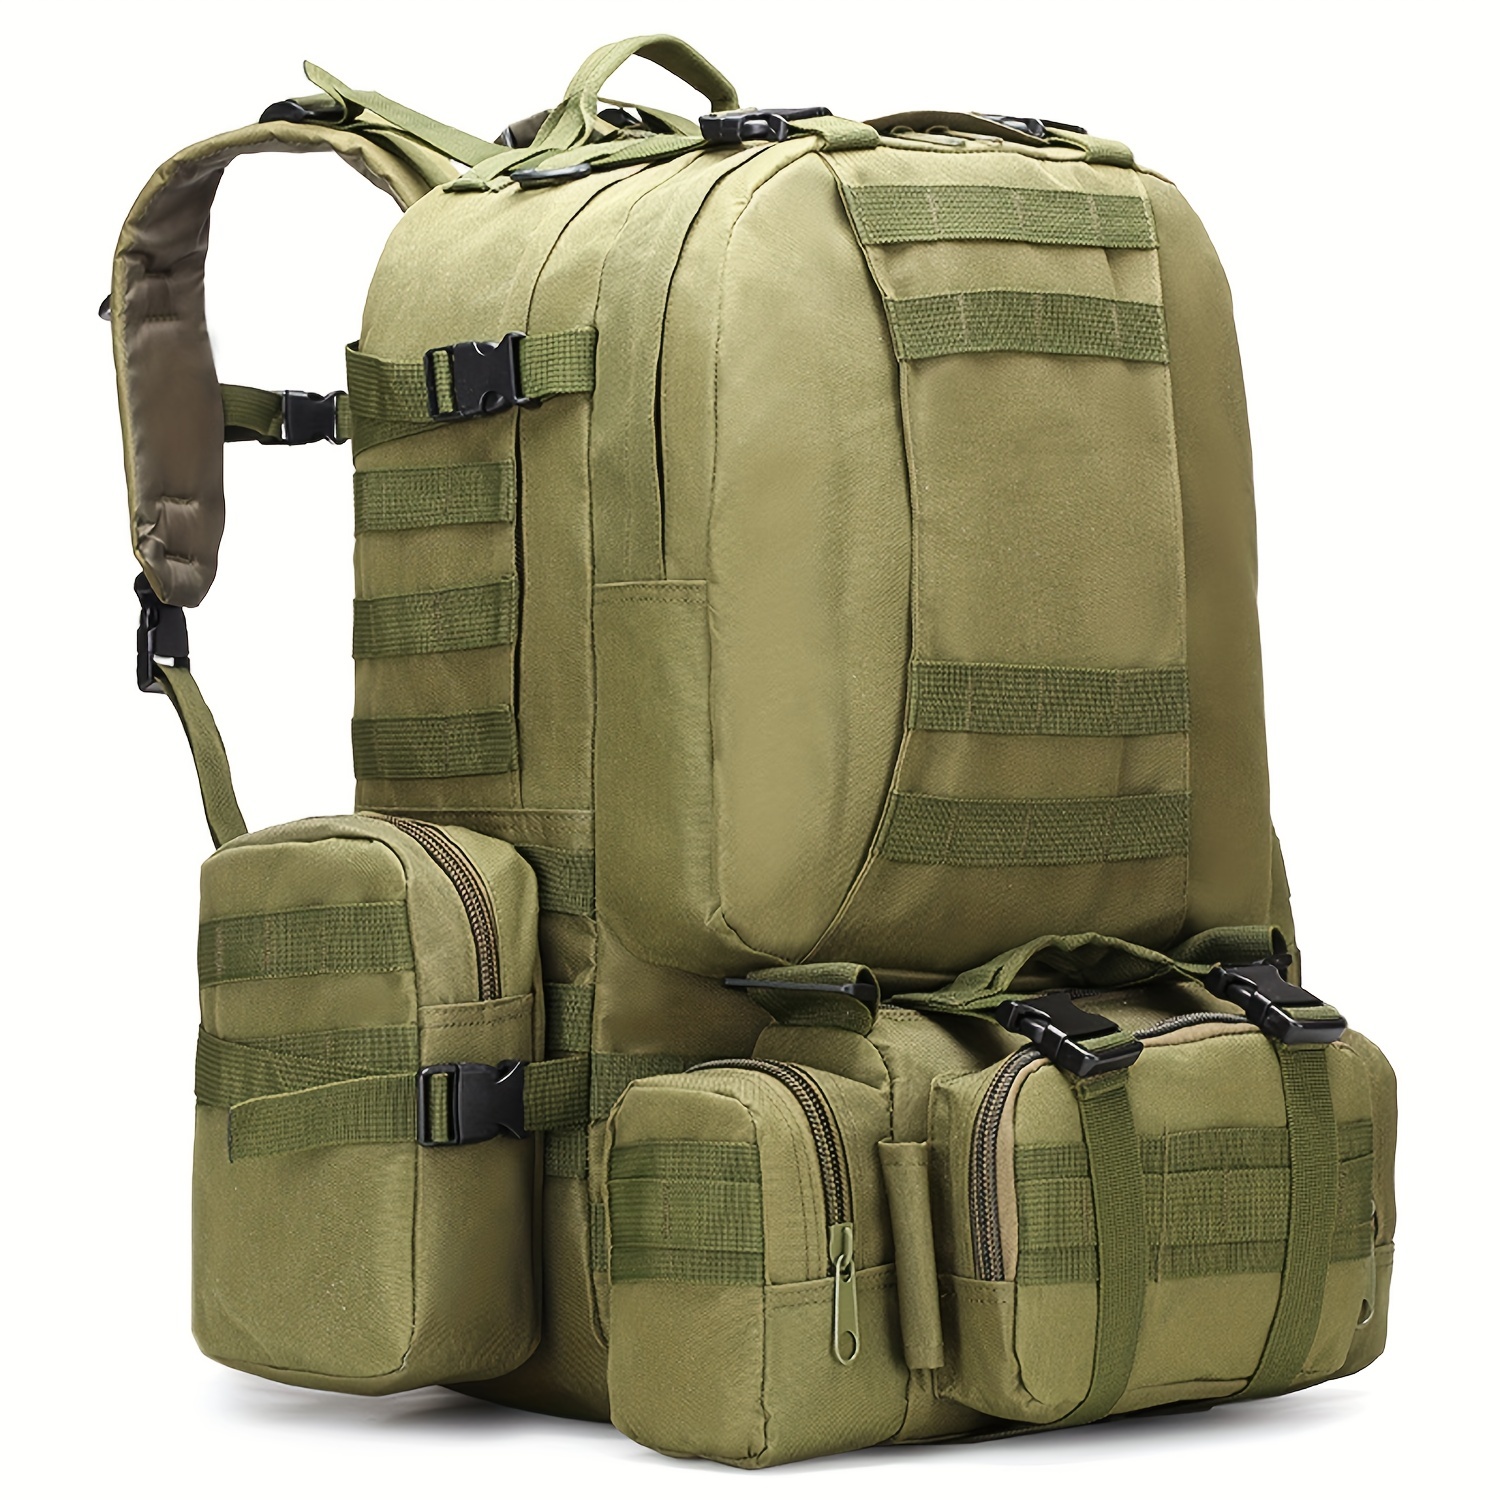 100L Outdoor Molle Military Tactical Bag Hiking Backpack